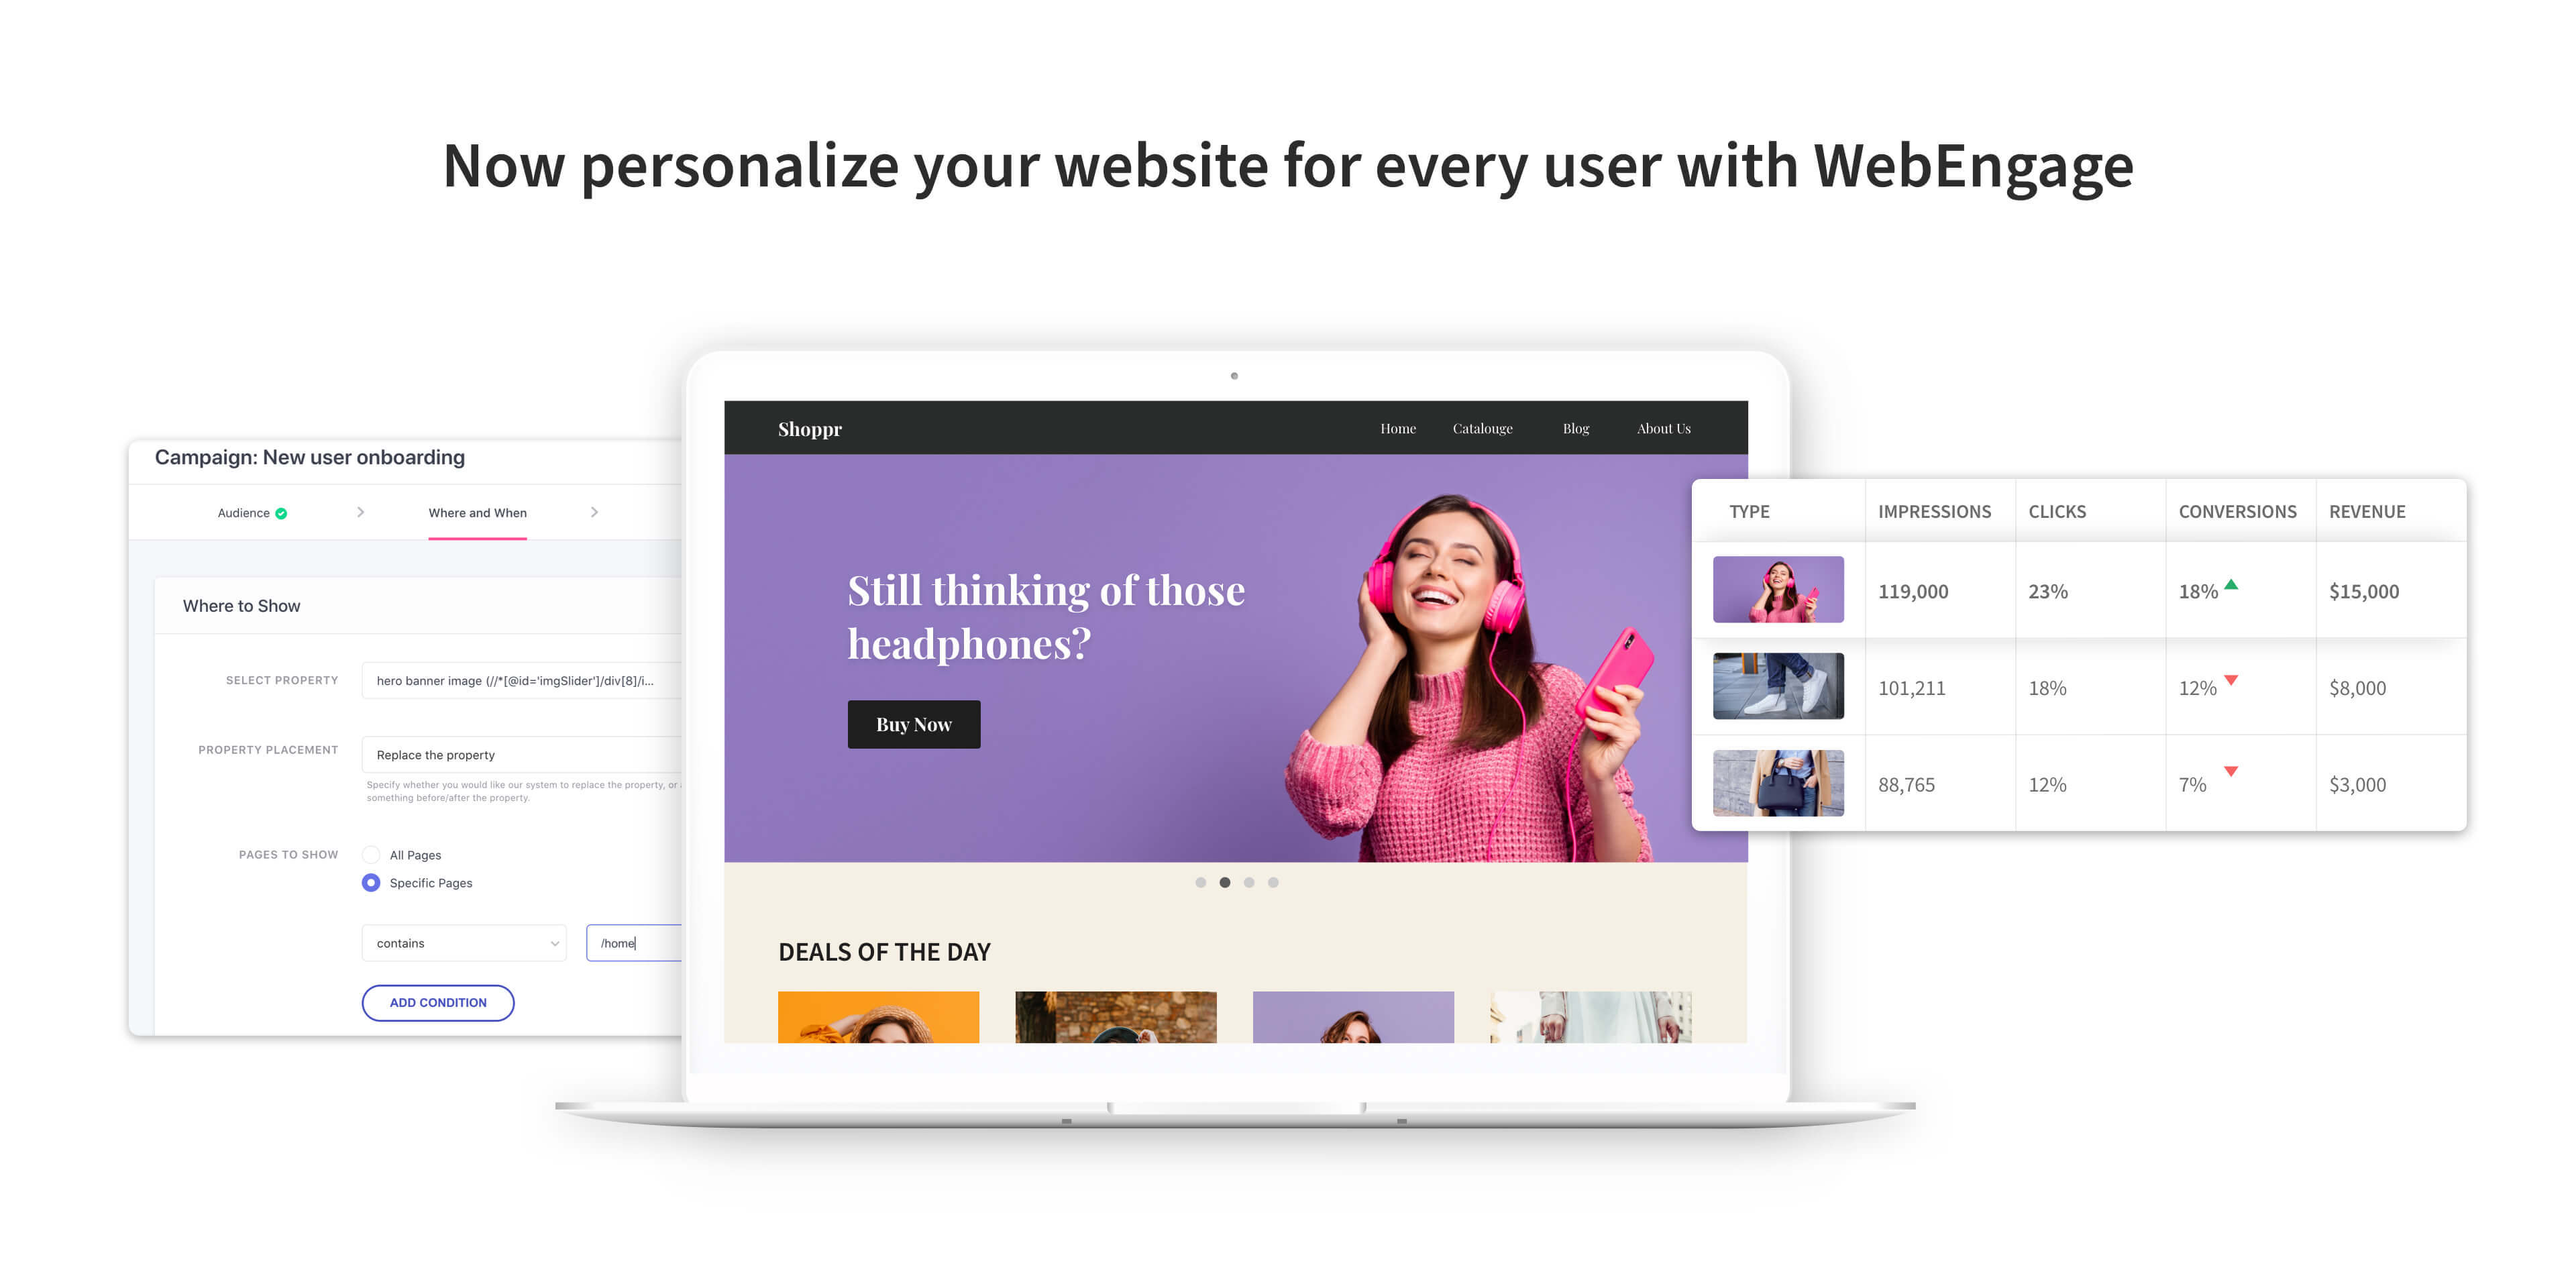 You can now create personalized Web Personalization campaigns to target your users